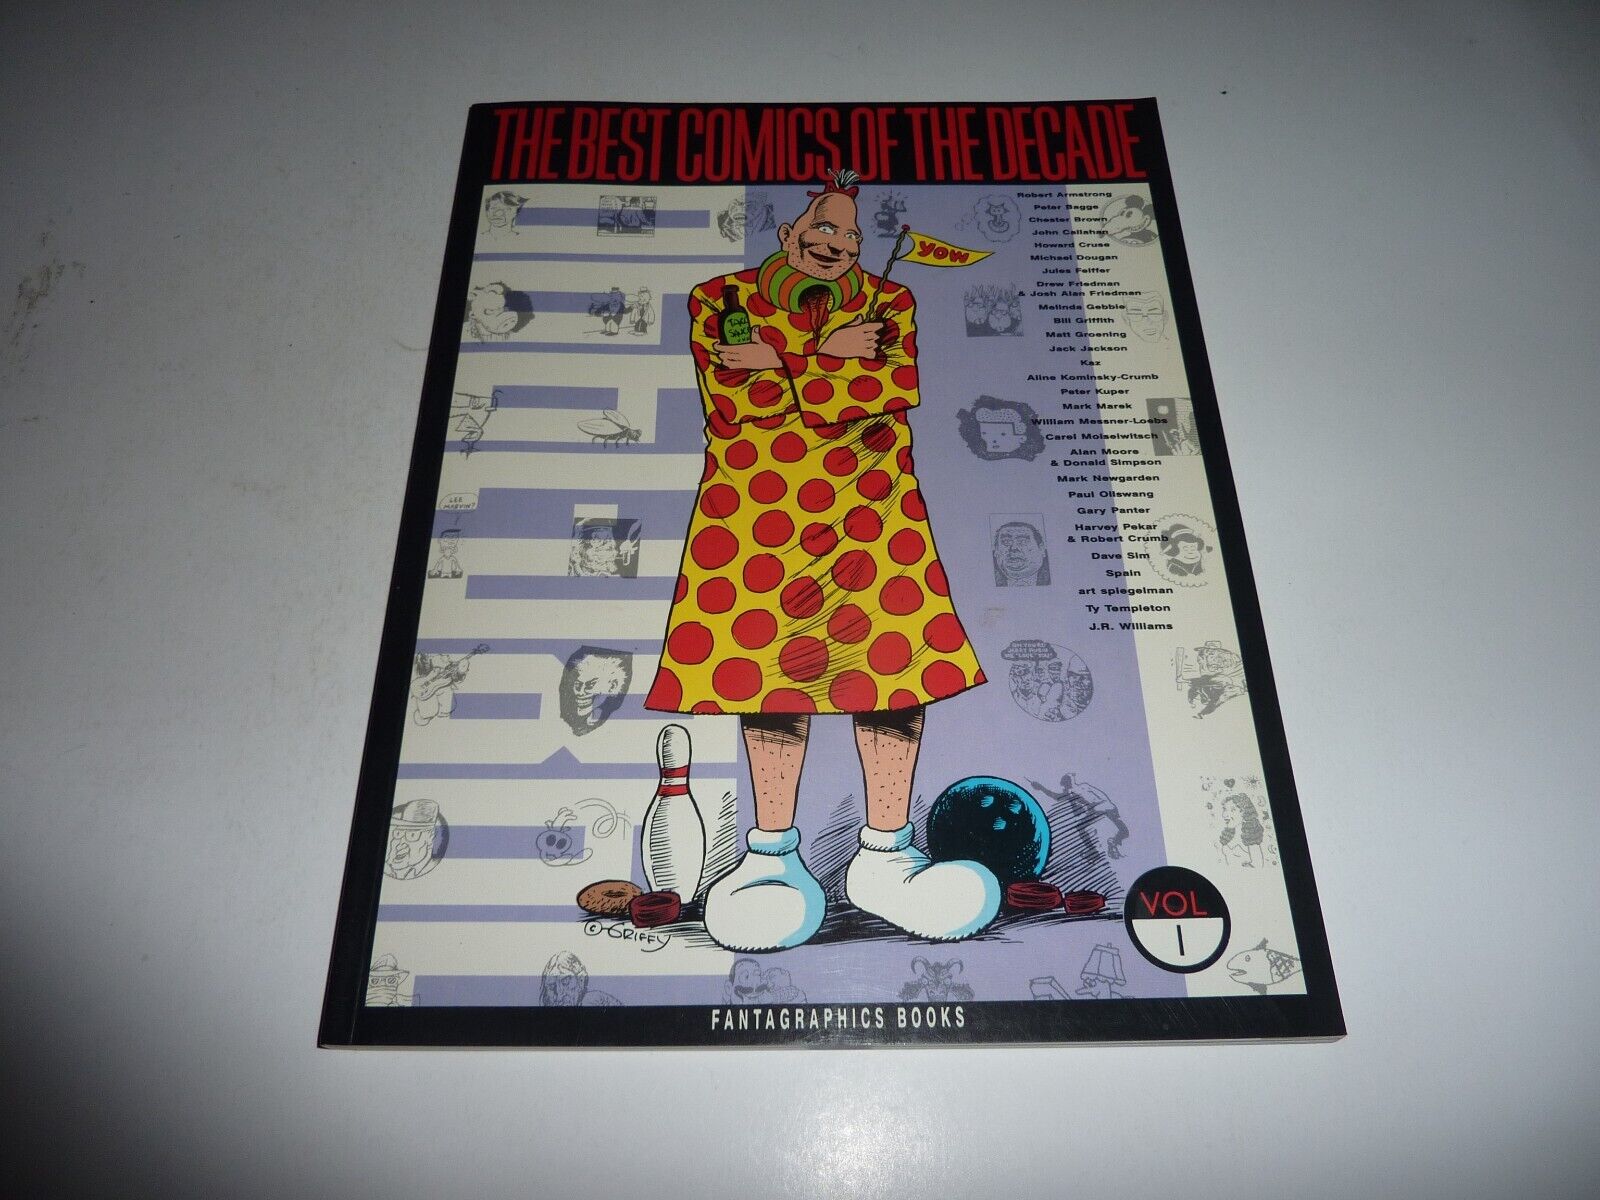 THE BEST COMICS OF THE DECADE #1 1980-1990 Fantagraphics Books 1990 NM-